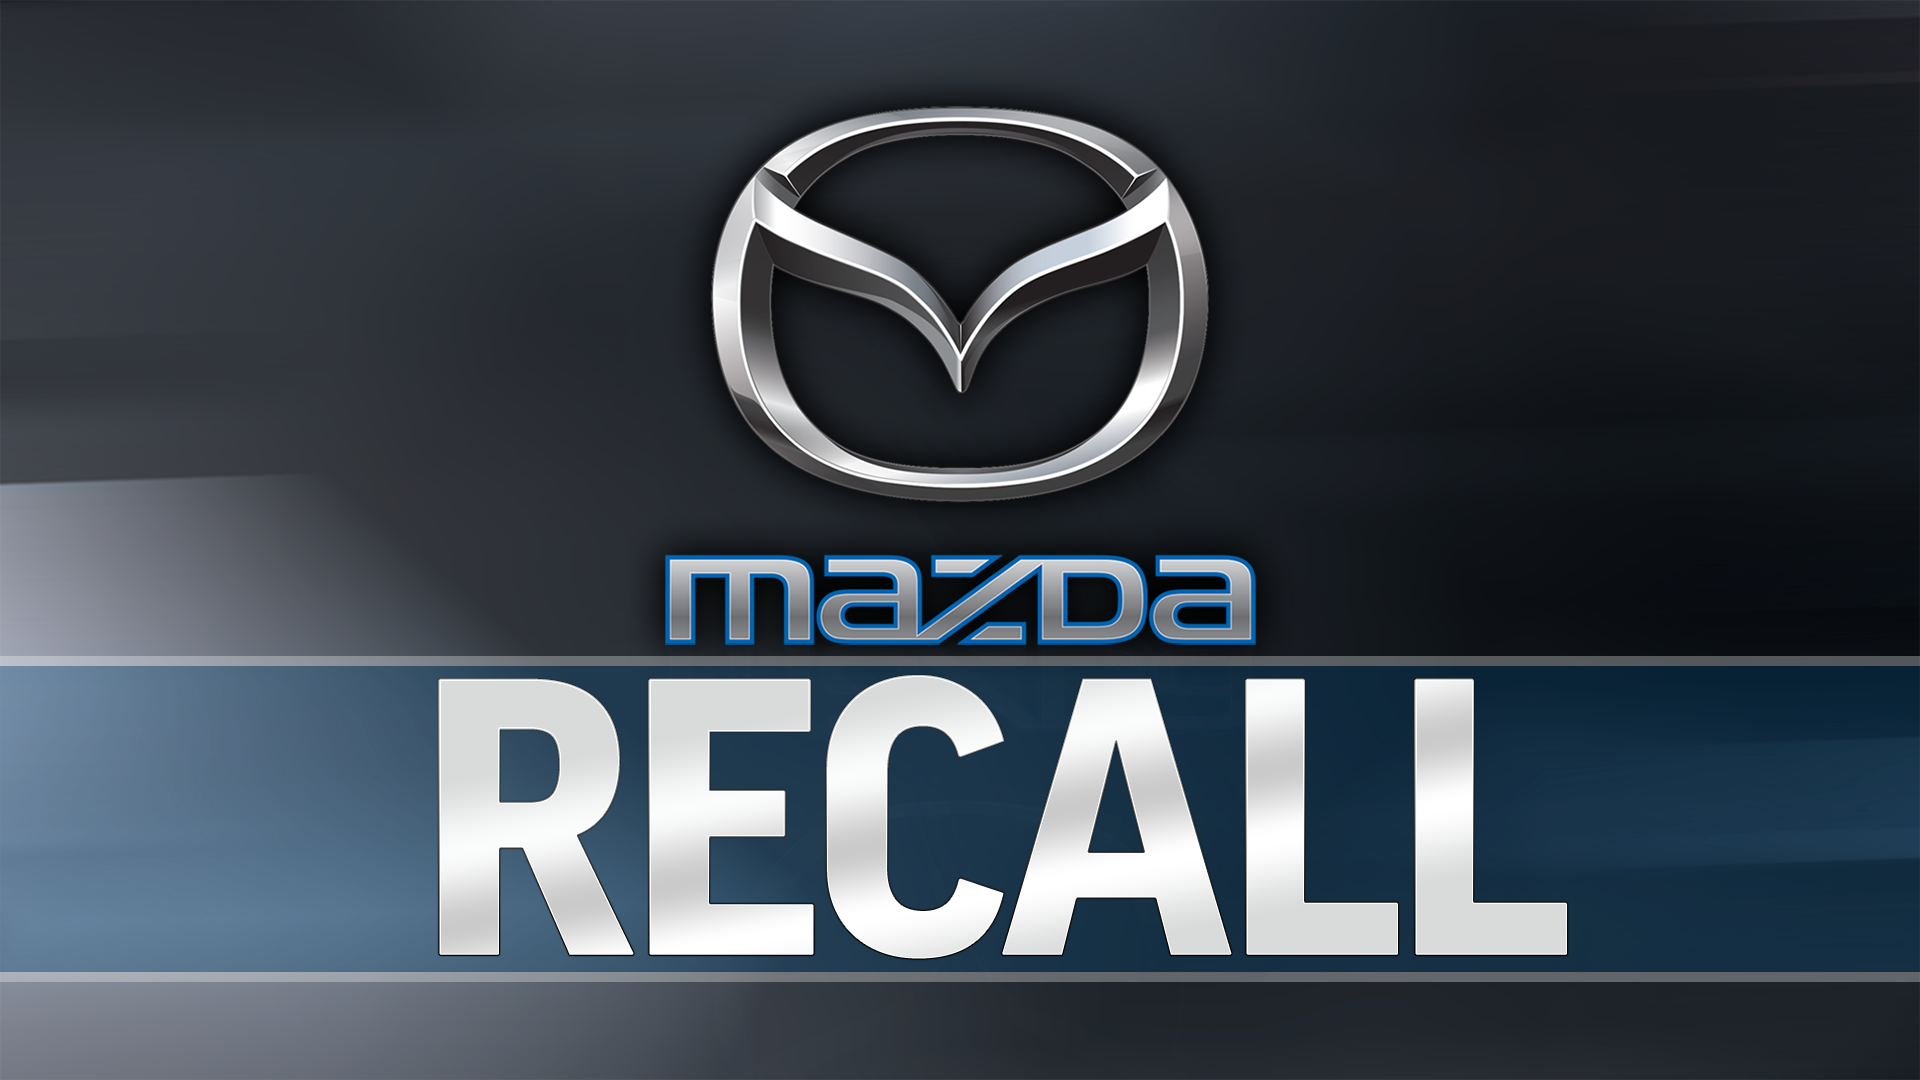 More than 60K Mazdas recalled for potential power steering issue